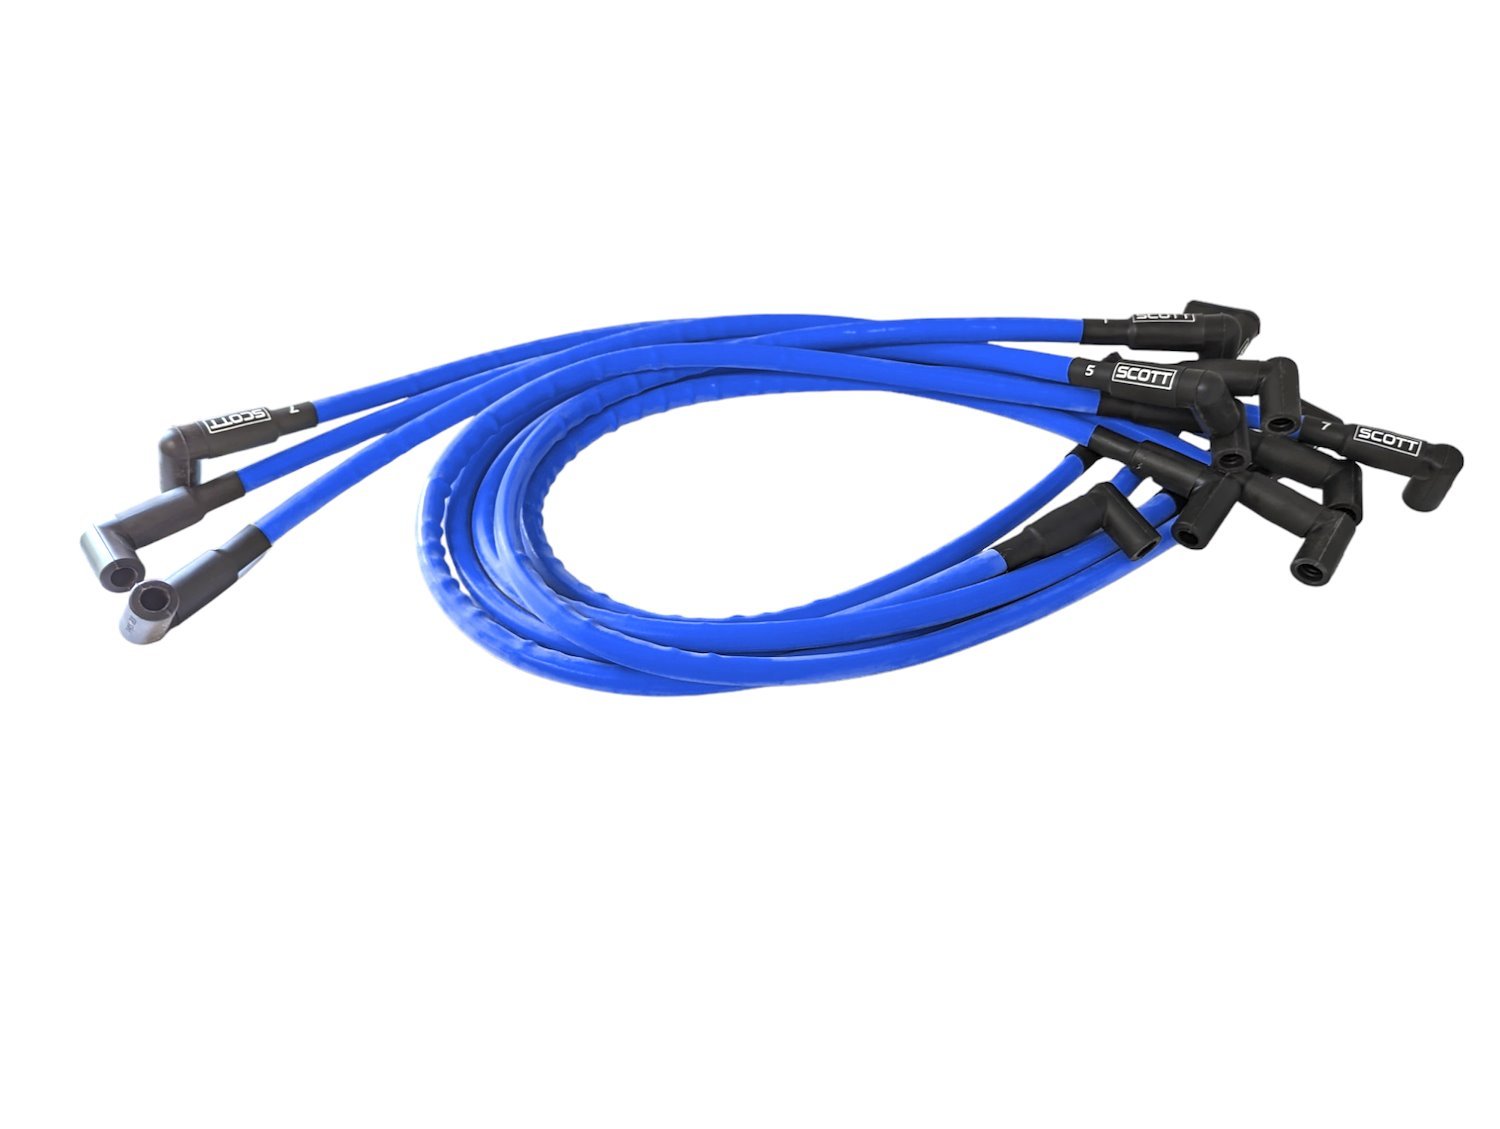 SPW-CH-402-4 High-Performance Silicone-Sleeved Spark Plug Wire Set for Small Block Chevy, Over Valve Cover [Blue]